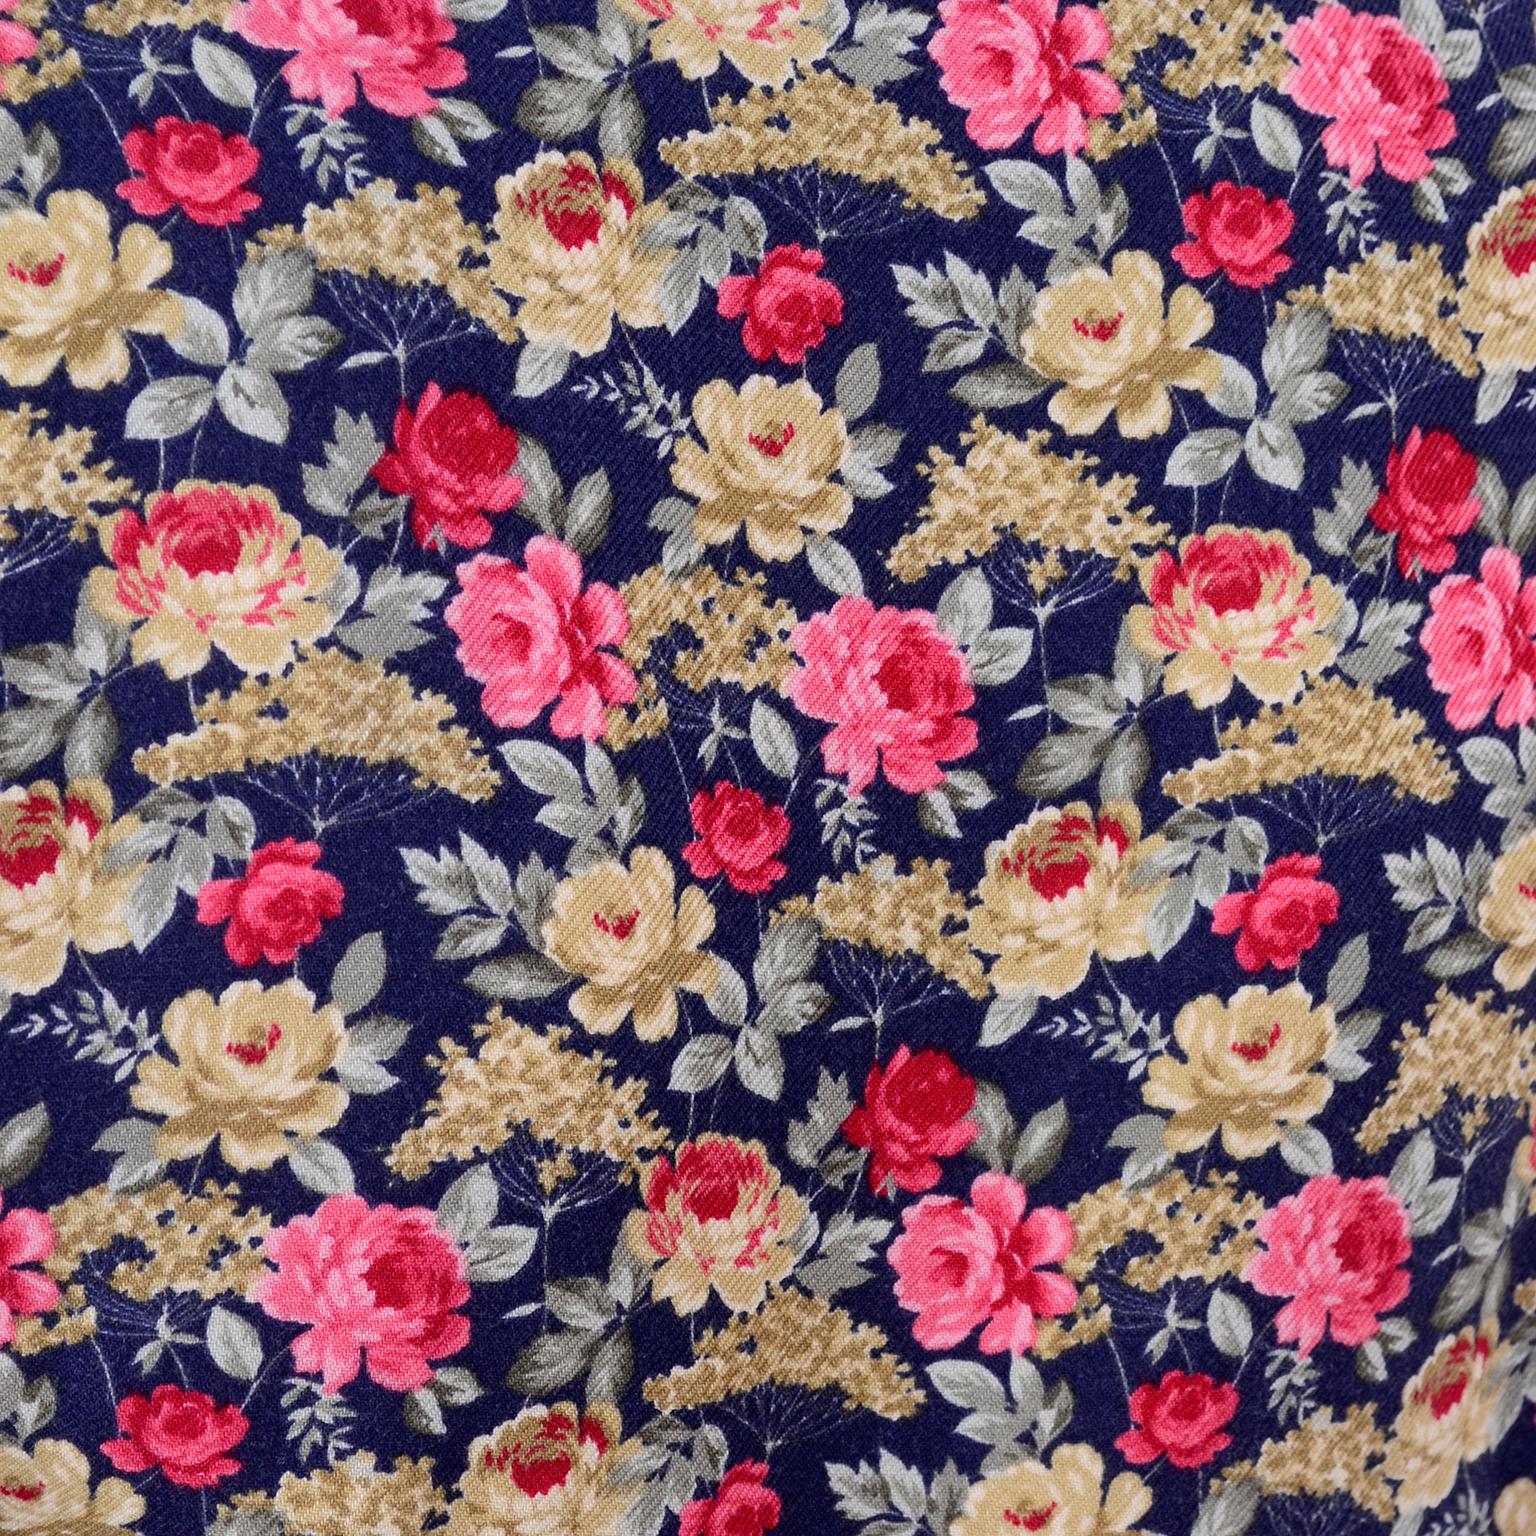 1980s Vintage Laura Ashley Navy Blue Cotton Dress W/ Pink & Red Flowers 2